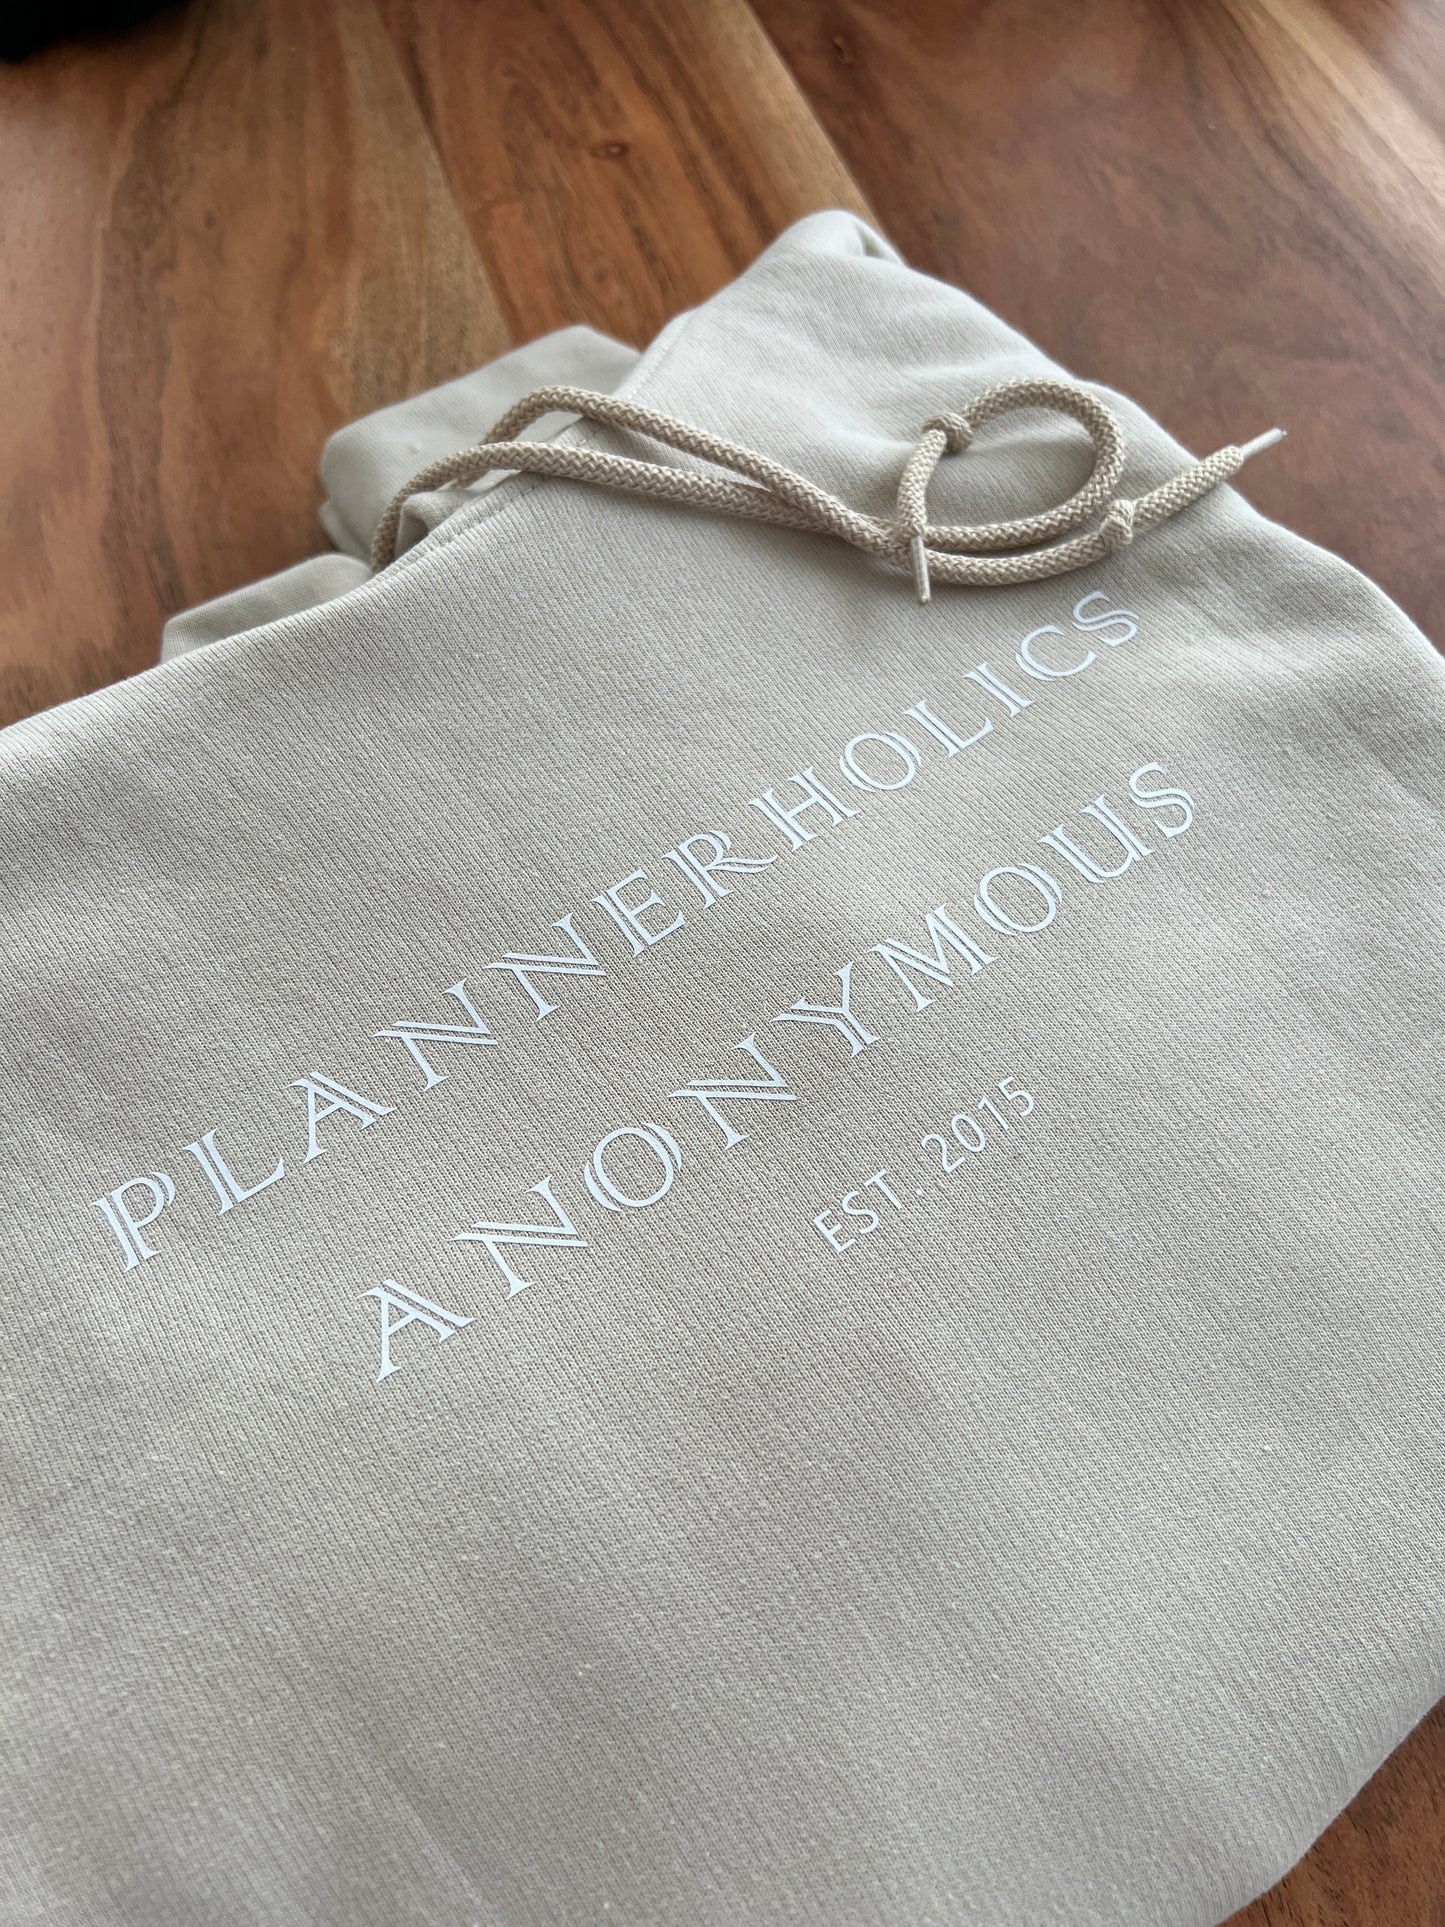 "Plannerholics Anonymous est. (custom year)" Sweatshirt/Hoodie • Choose your own colours • Planner Collection